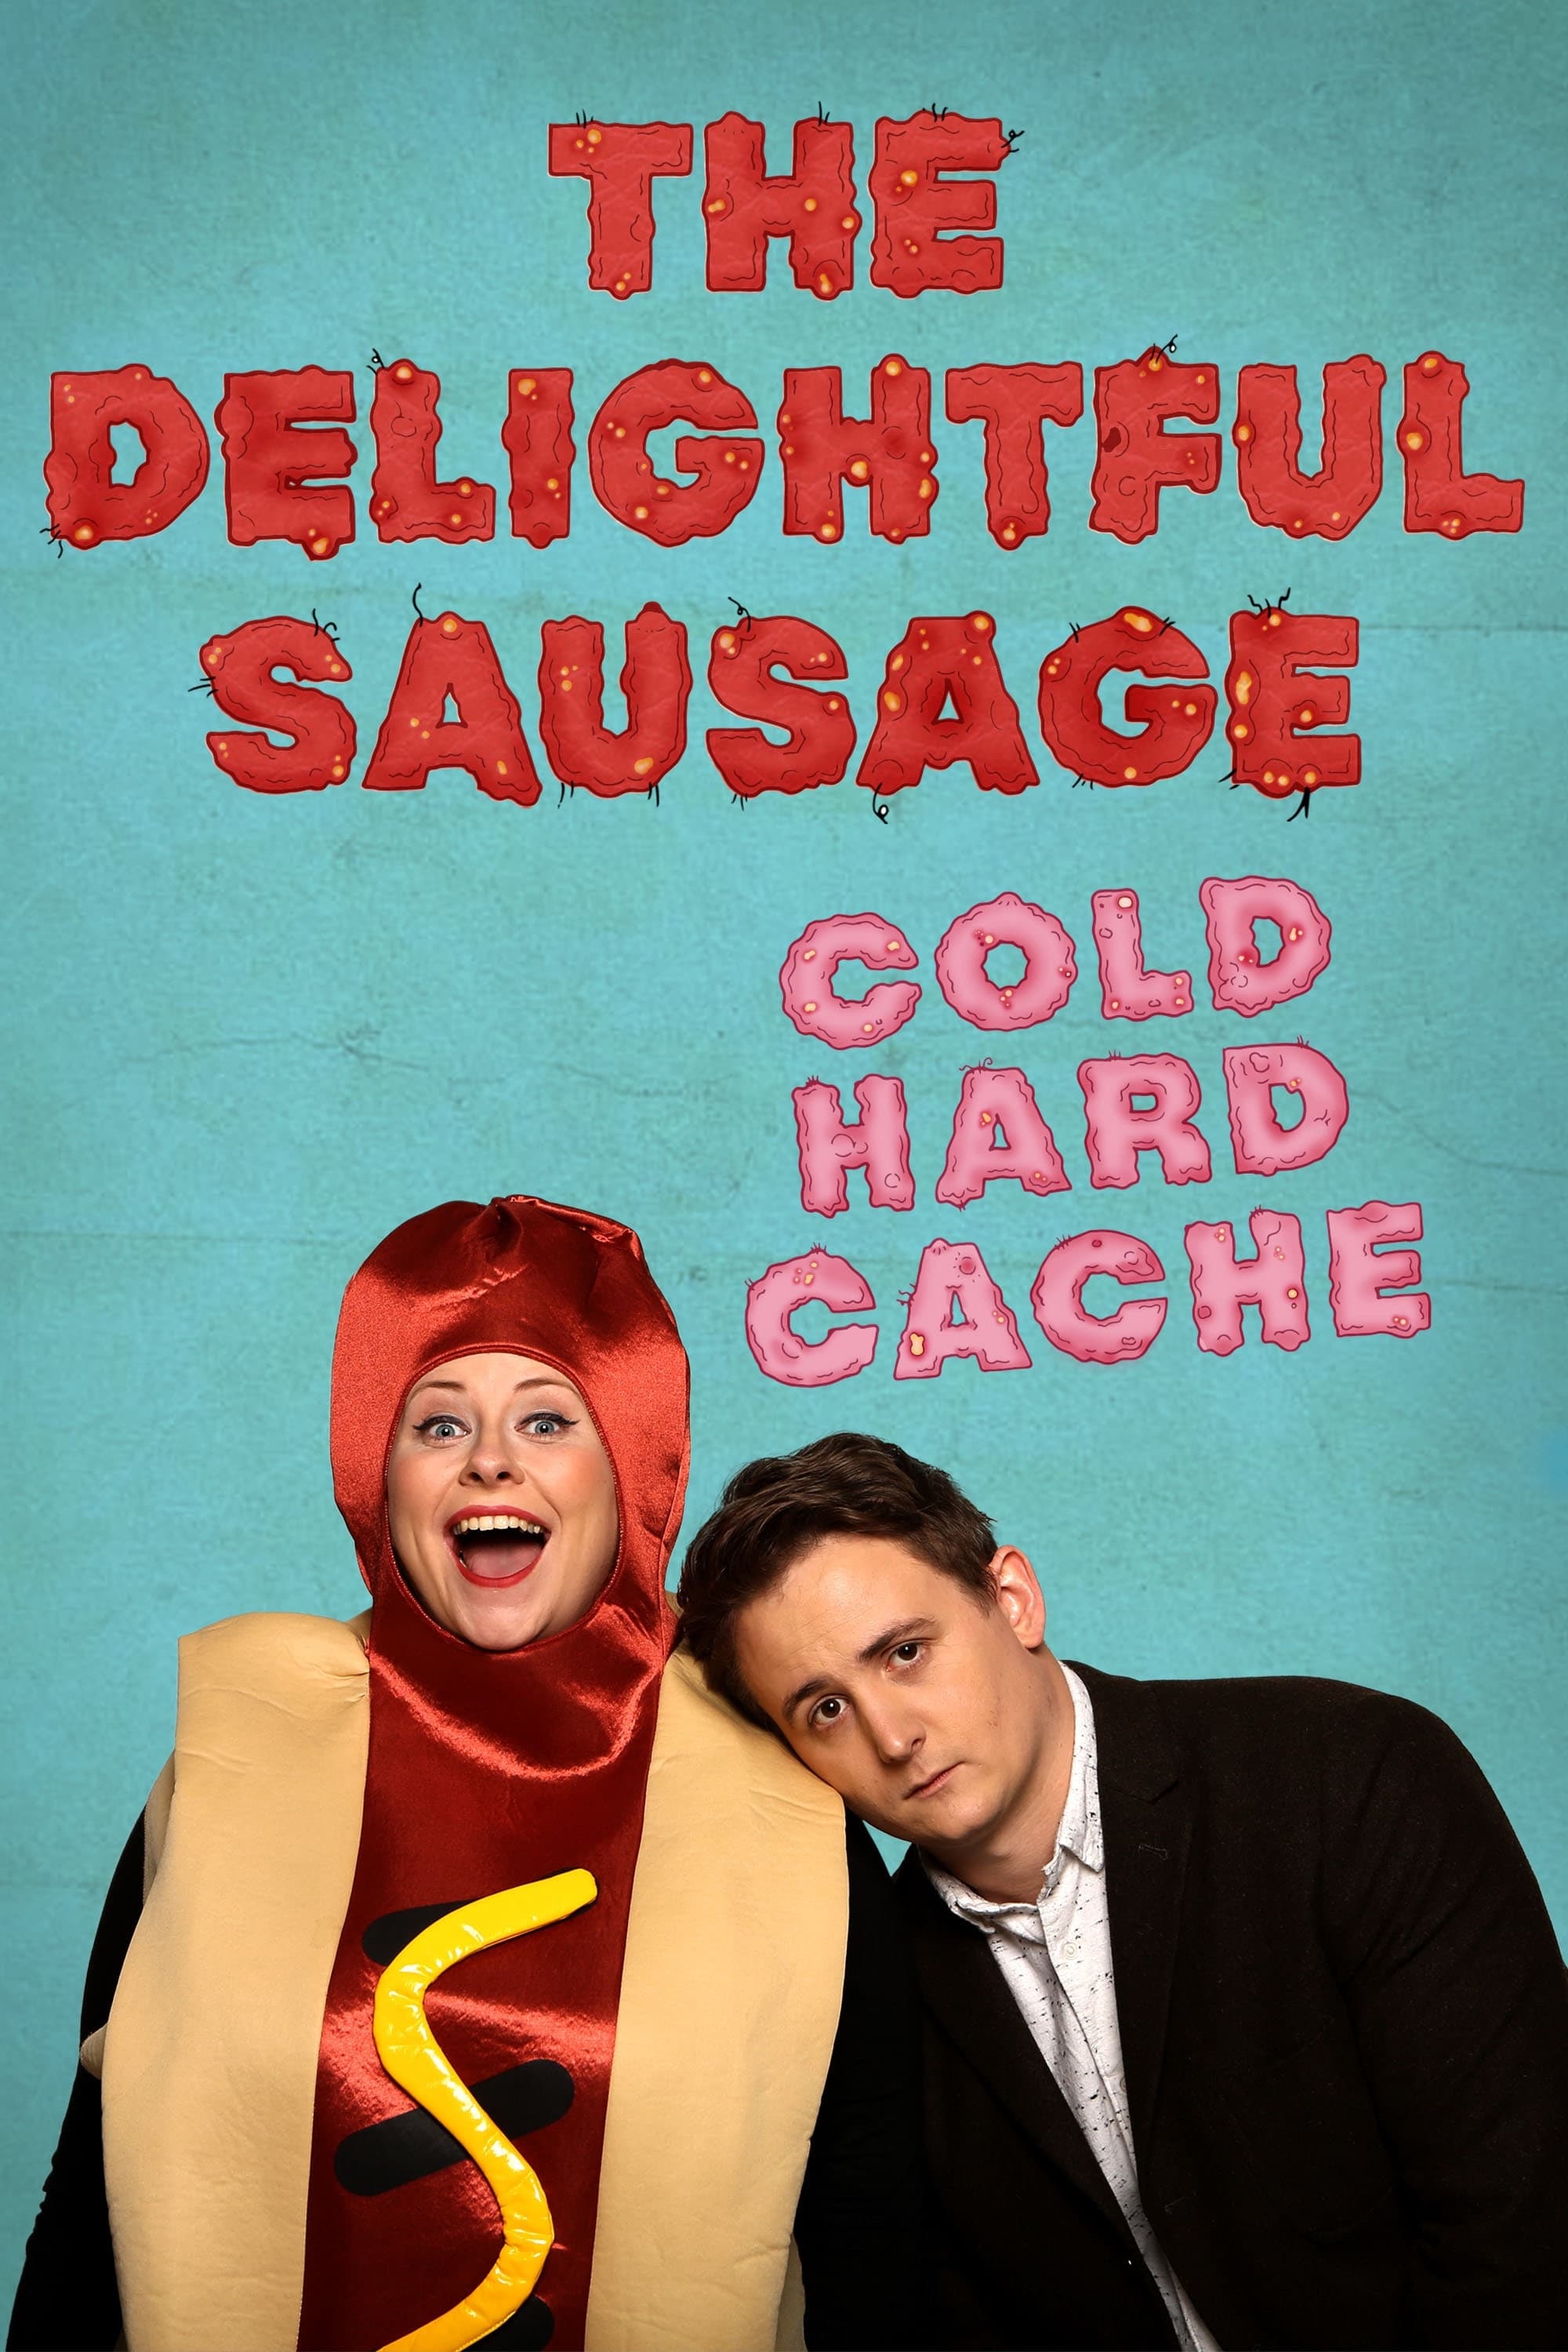 The Delightful Sausage - Cold Hard Cache